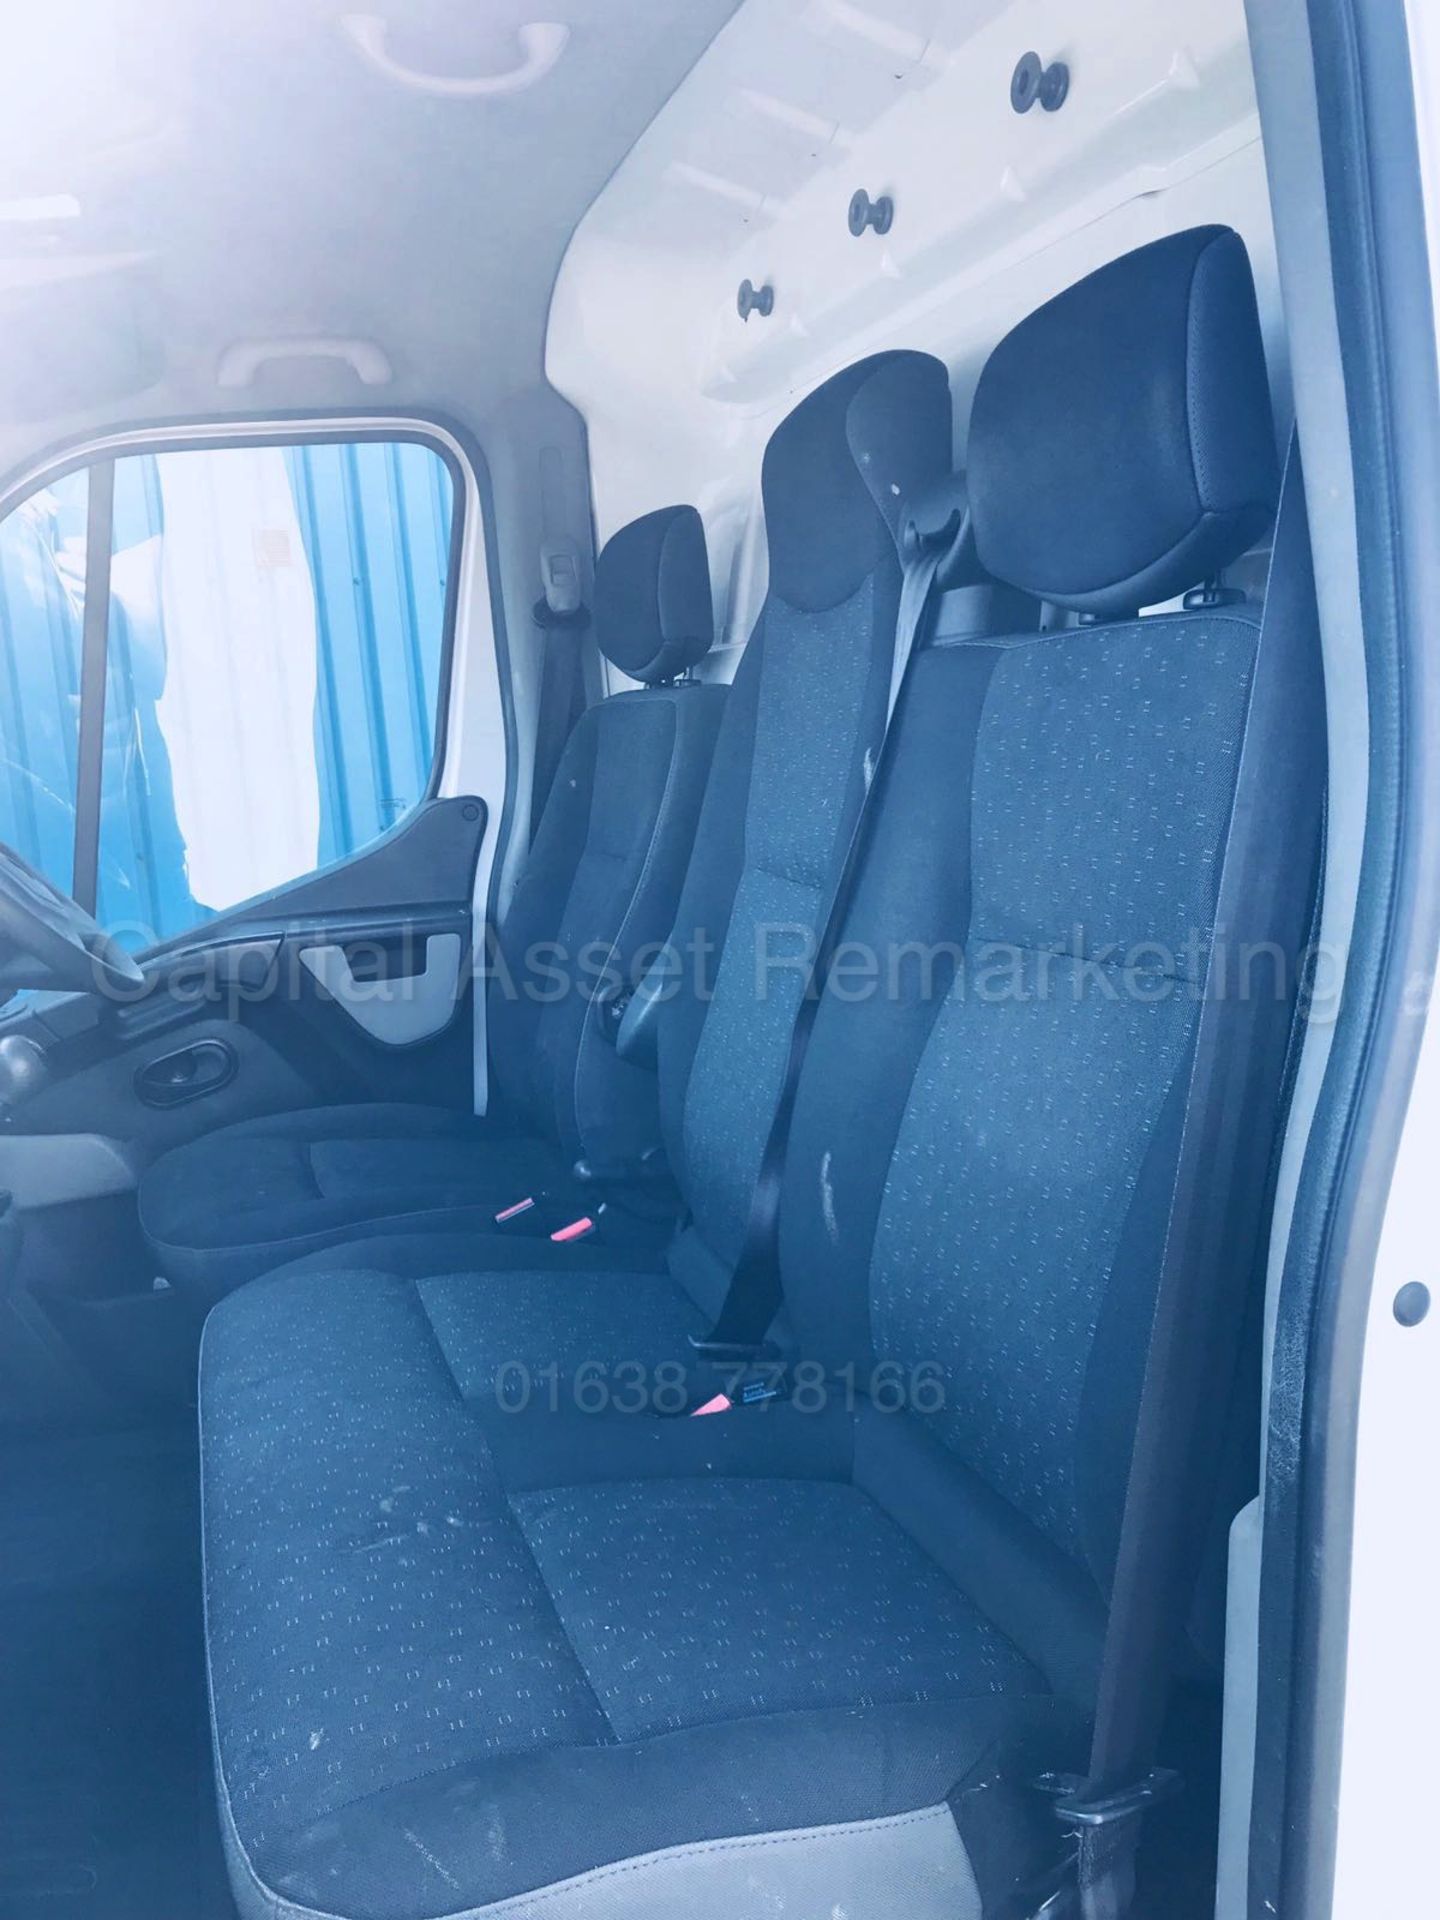 (On Sale) VAUXHALL MOVANO F3500 'LWB HI-ROOF' (2013 MODEL) '2.3 CDTI - 125 BHP - 6 SPEED' *AIR CON* - Image 14 of 21